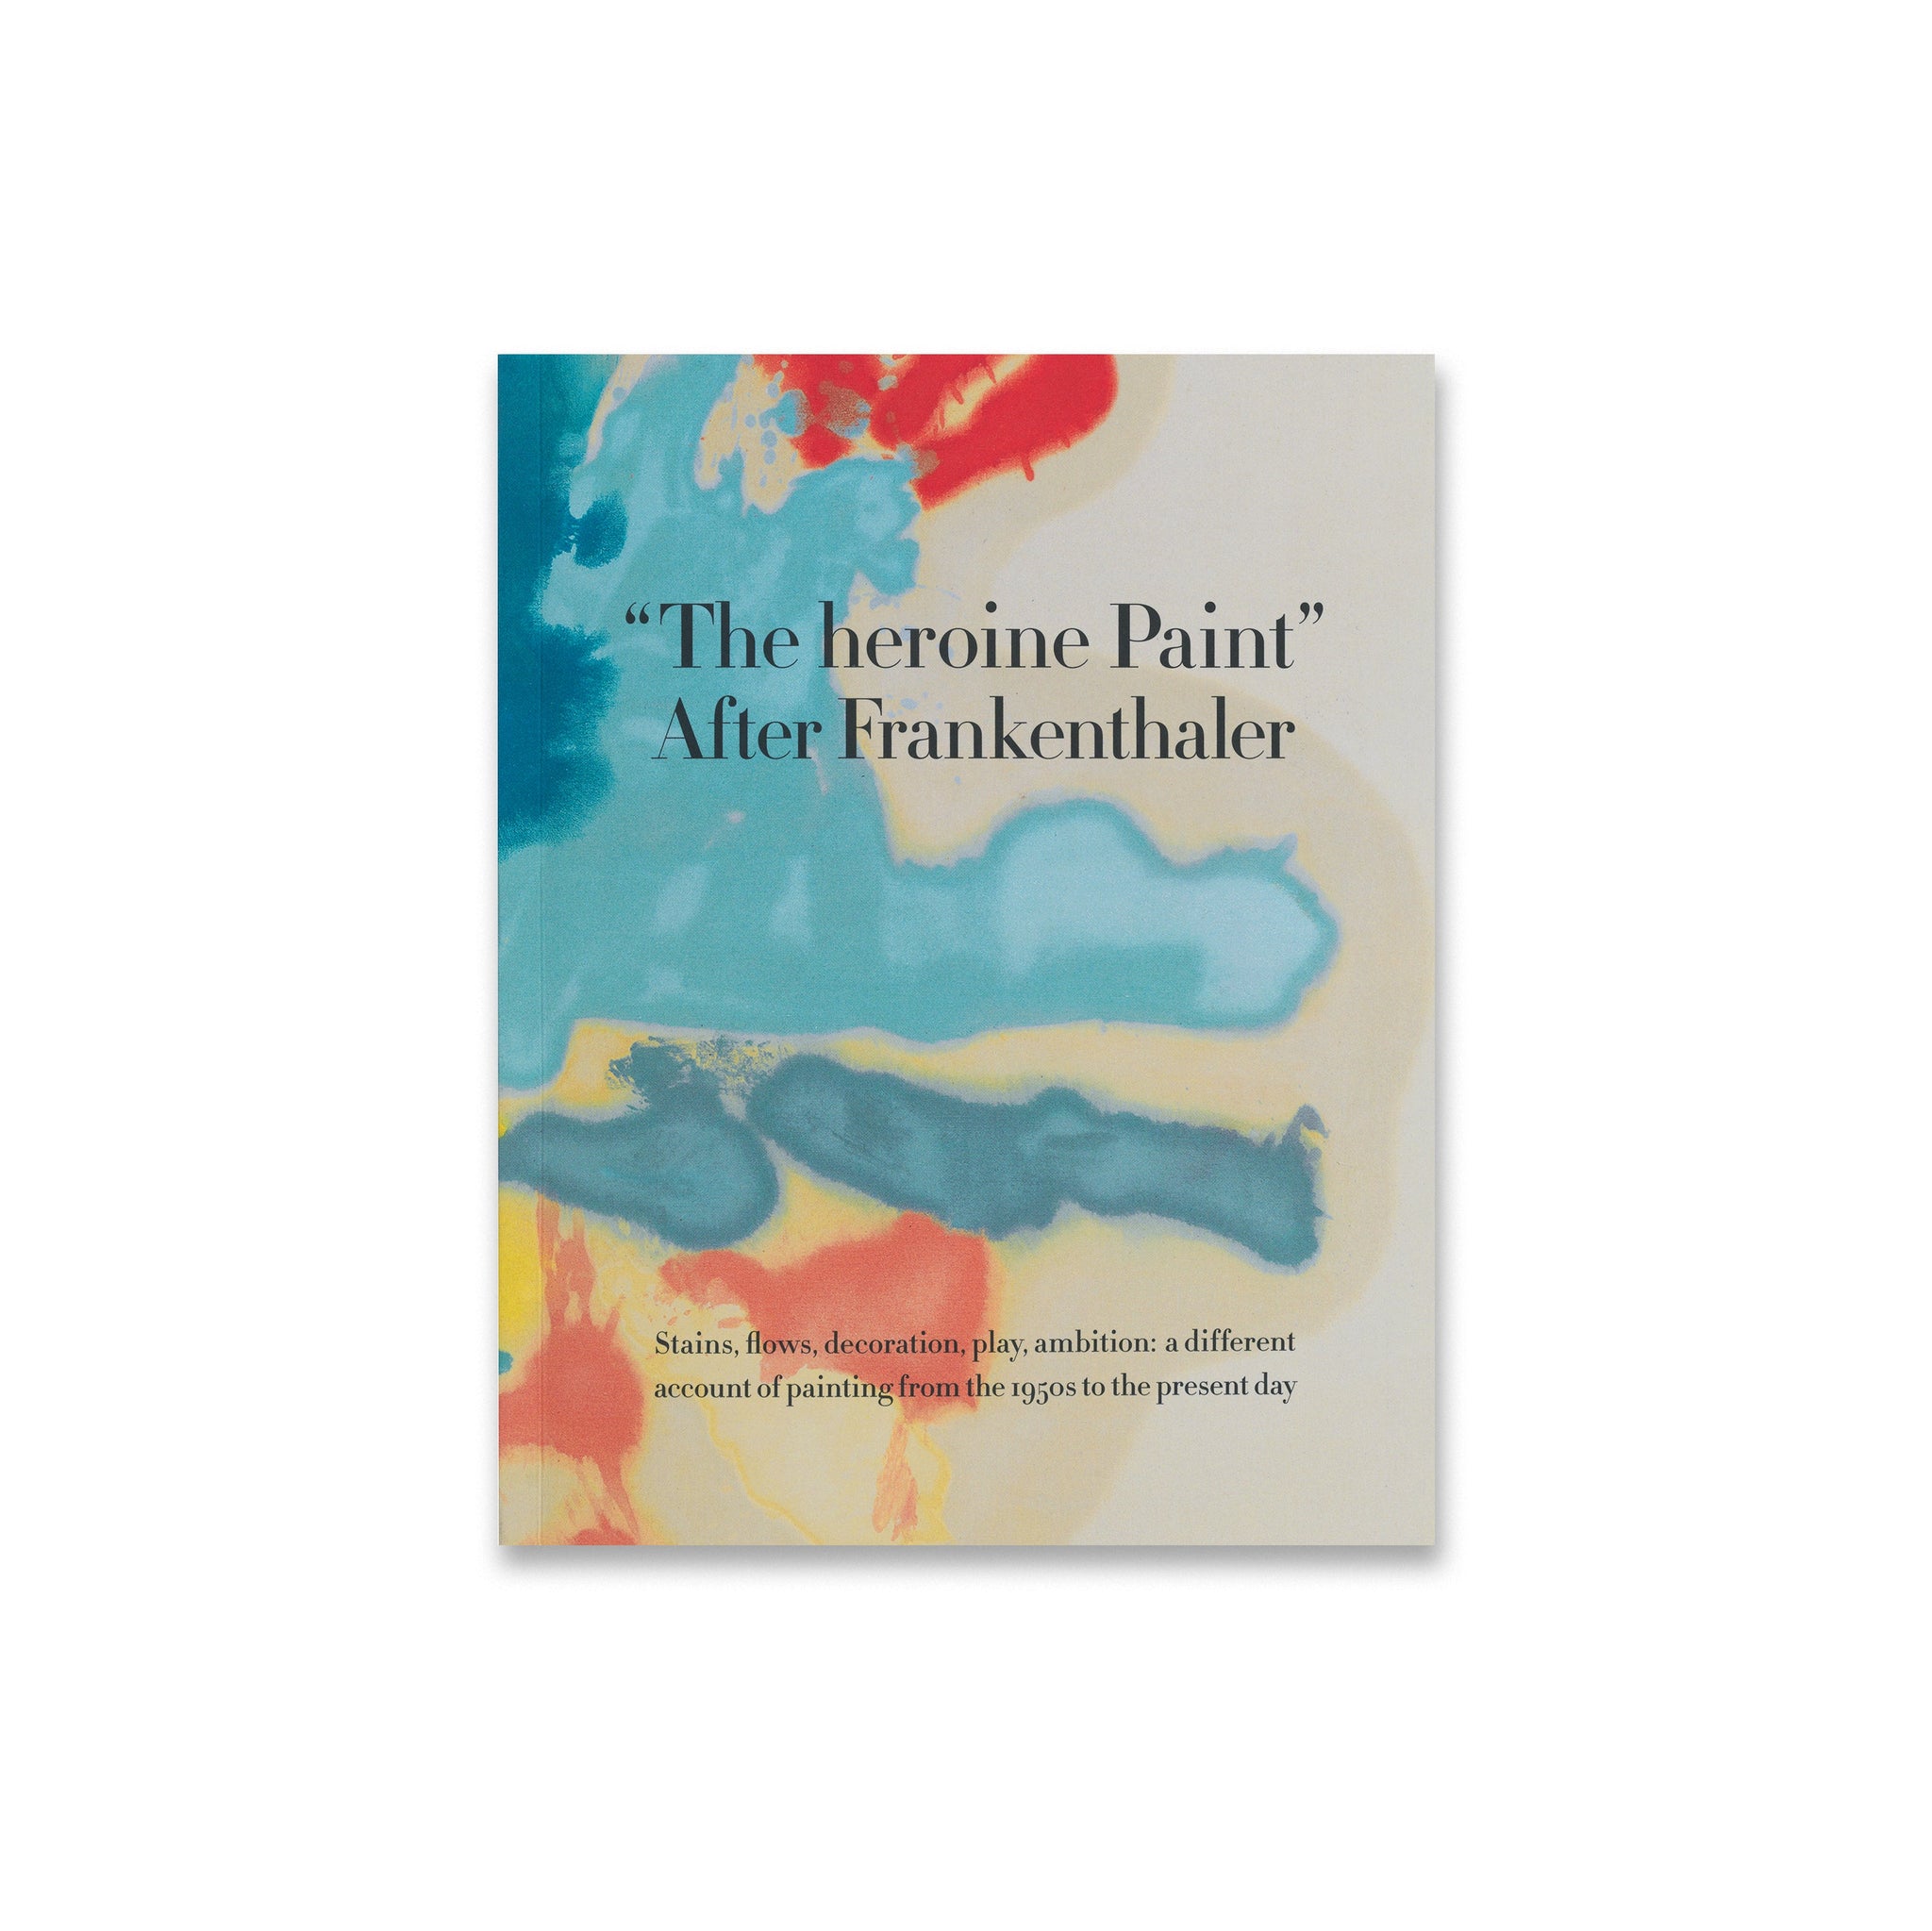 Cover of the book “The heroine Paint”: After Frankenthaler